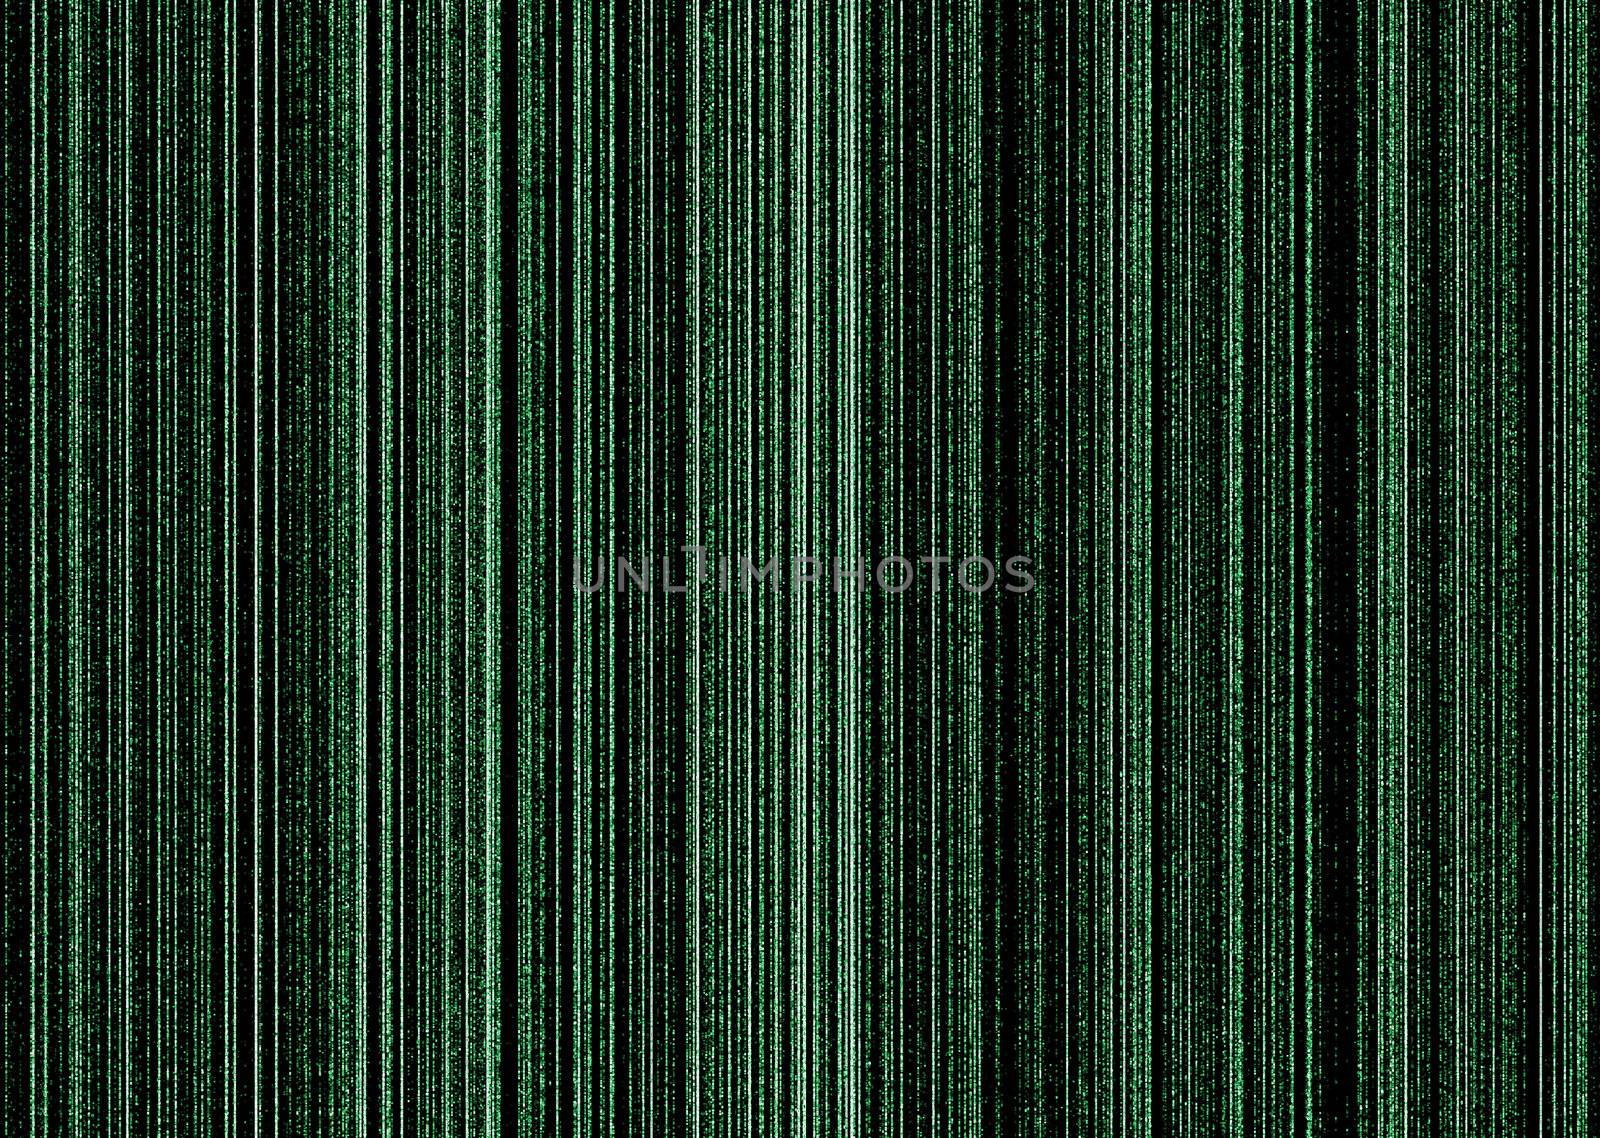 Illustrated matrix concept background image in black and green